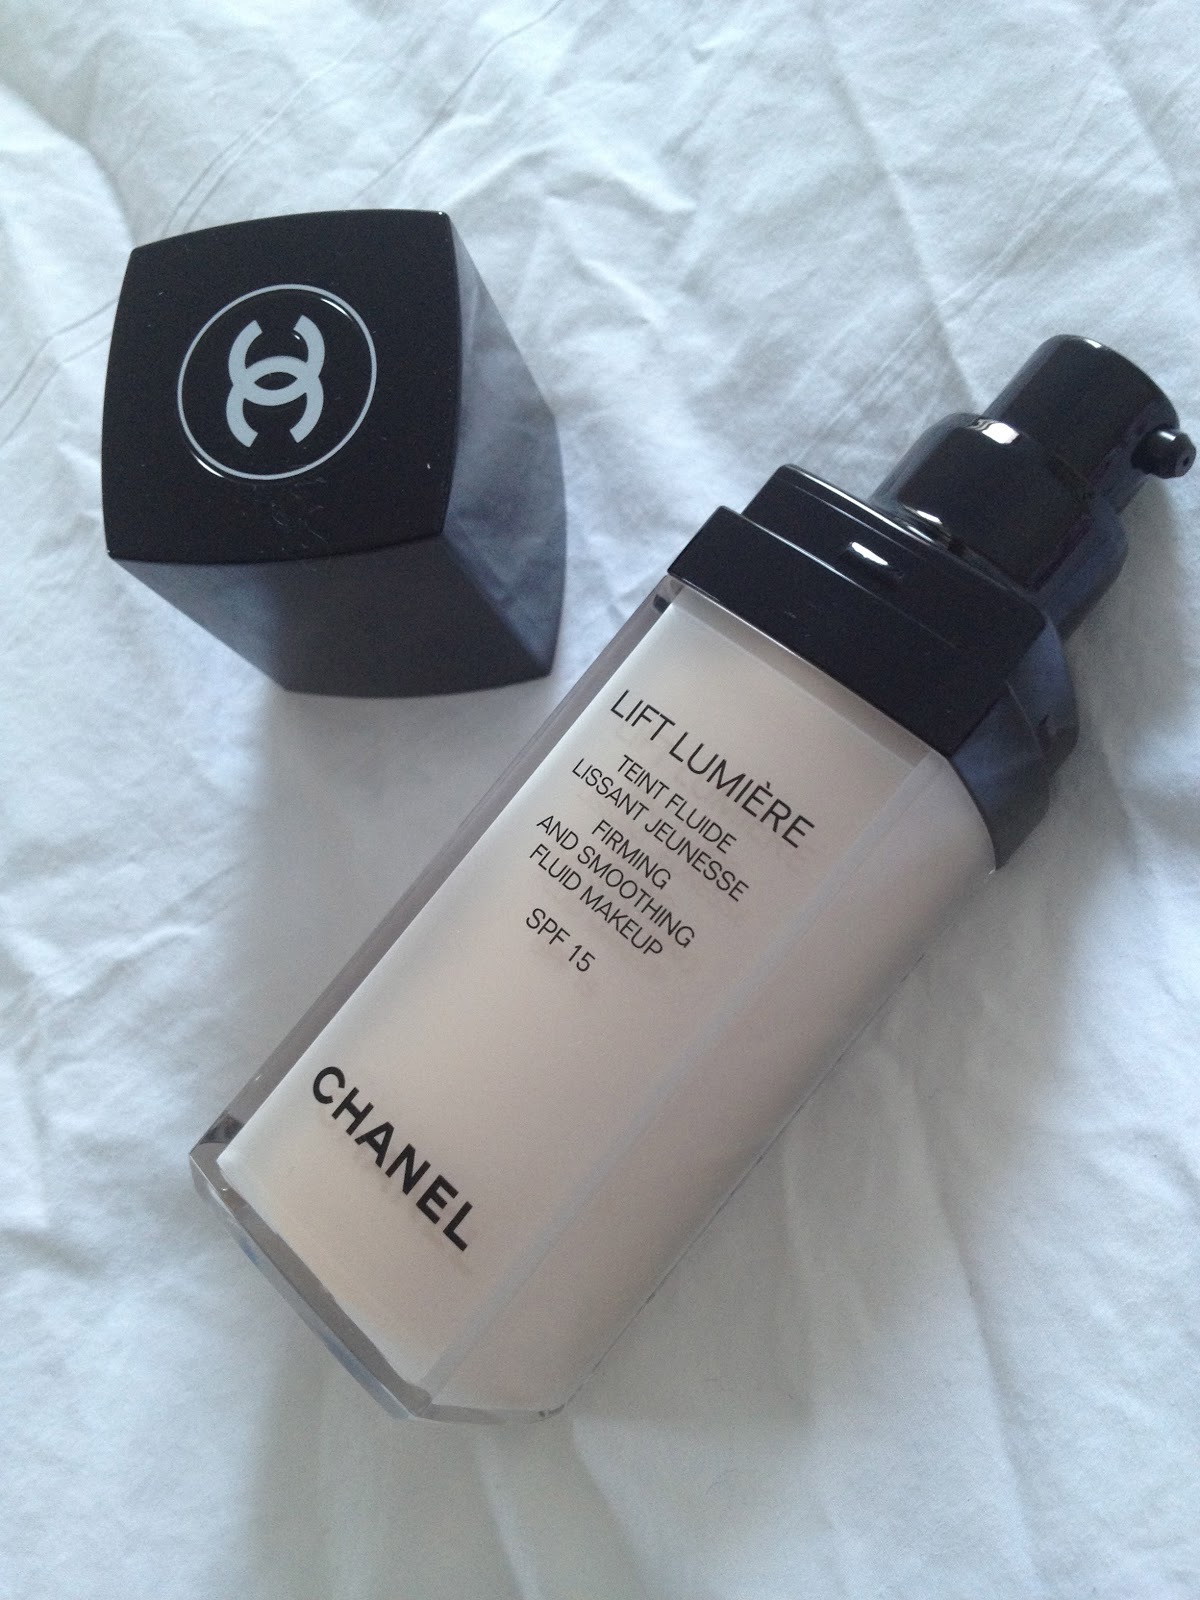 Farhana J's Blog: Review: CHANEL LIFT LUMIÈRE Firming And Smoothing Fluid  Makeup